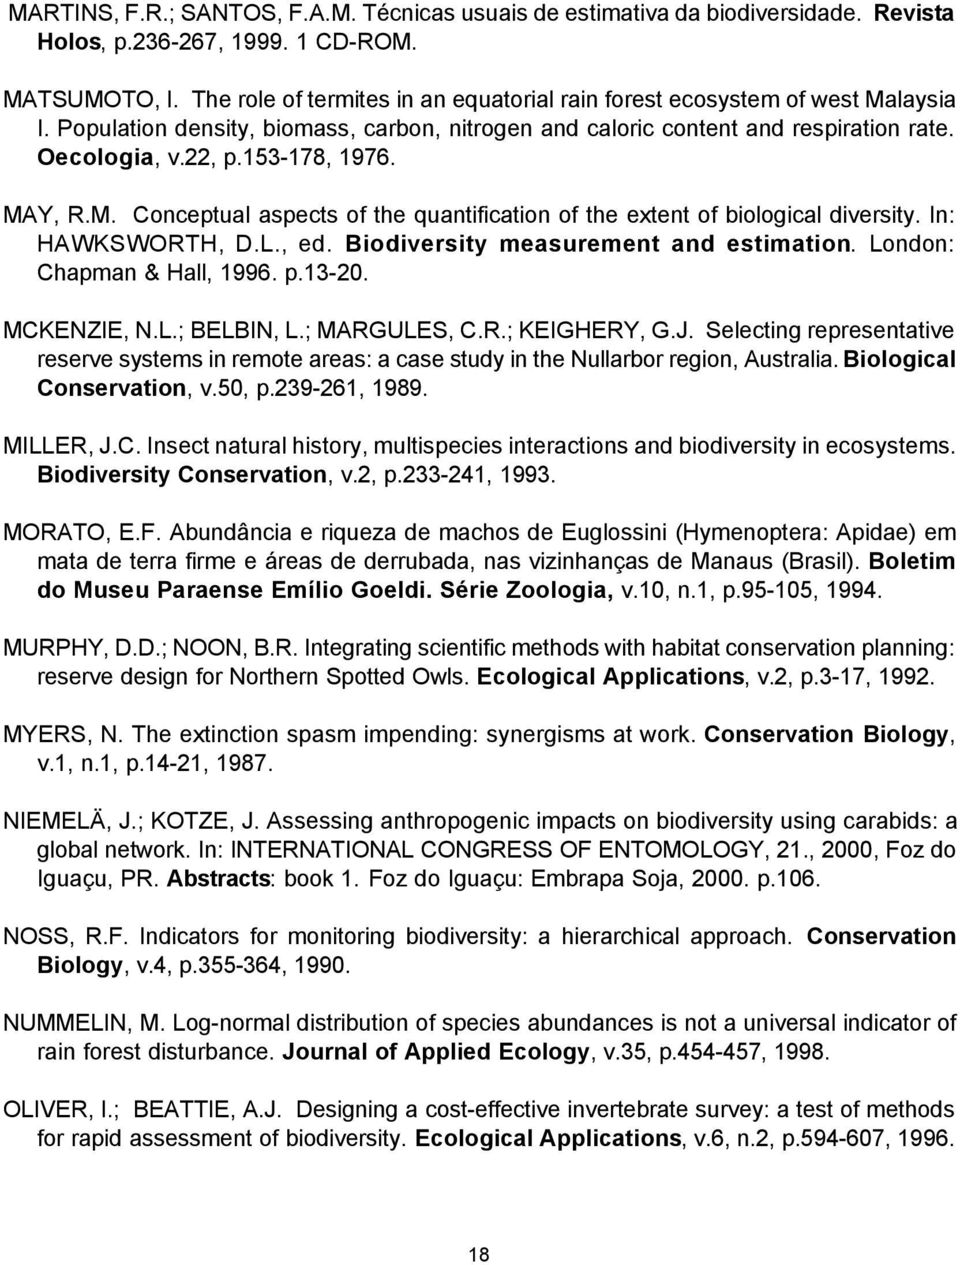 153-178, 1976. MAY, R.M. Conceptual aspects of the quantification of the extent of biological diversity. In: HAWKSWORTH, D.L., ed. Biodiversity measurement and estimation.